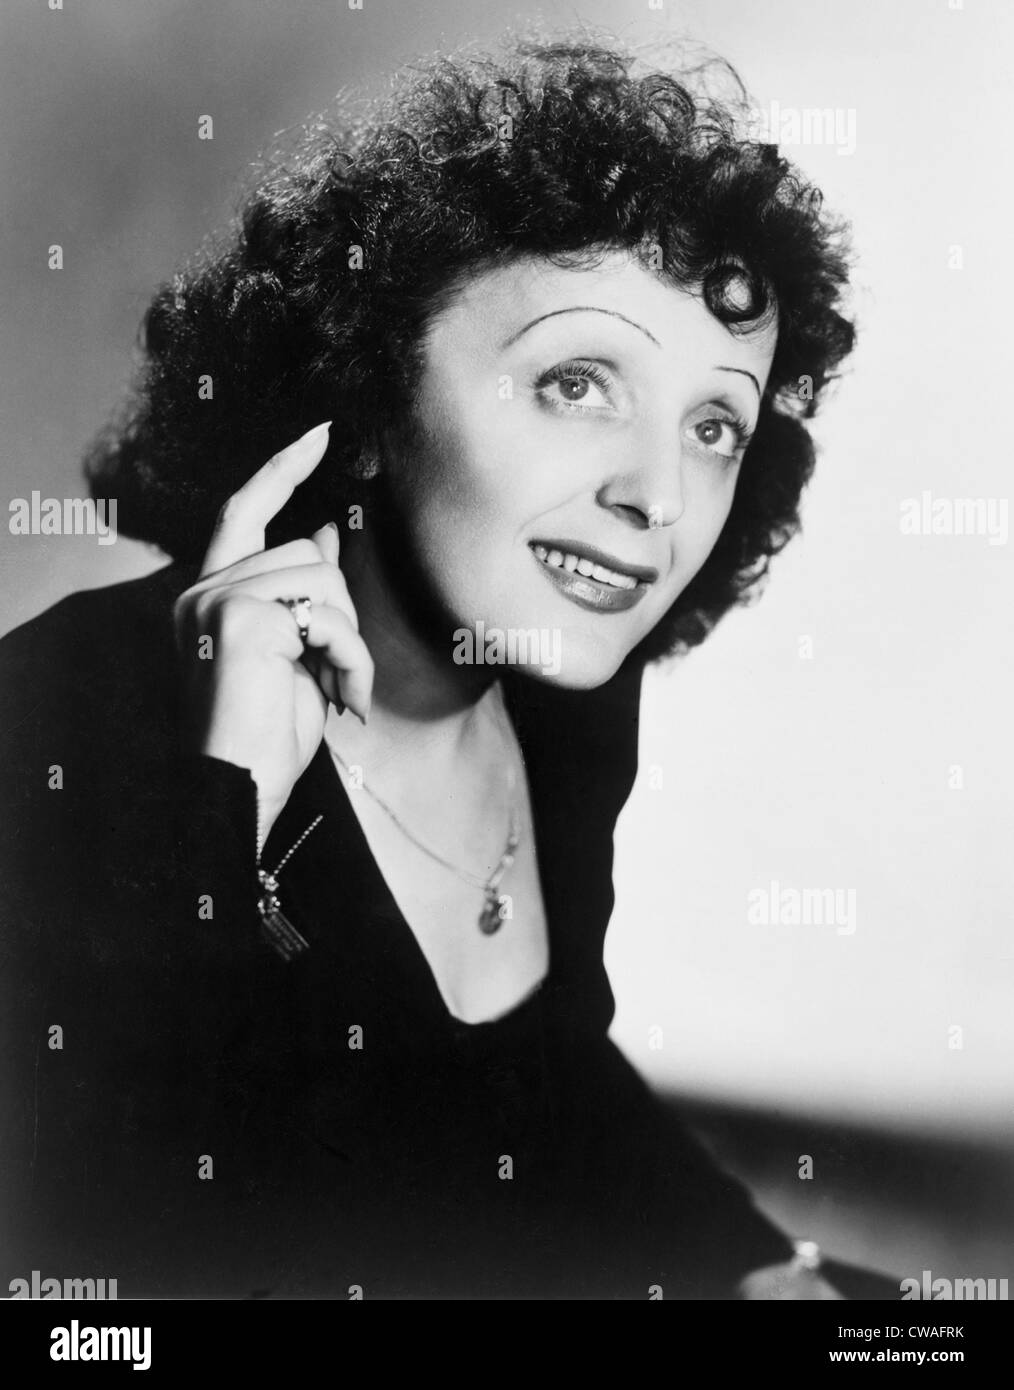 EDITH PIAF (1915-1963), French ballad singer in publicity still from 1947. Stock Photo